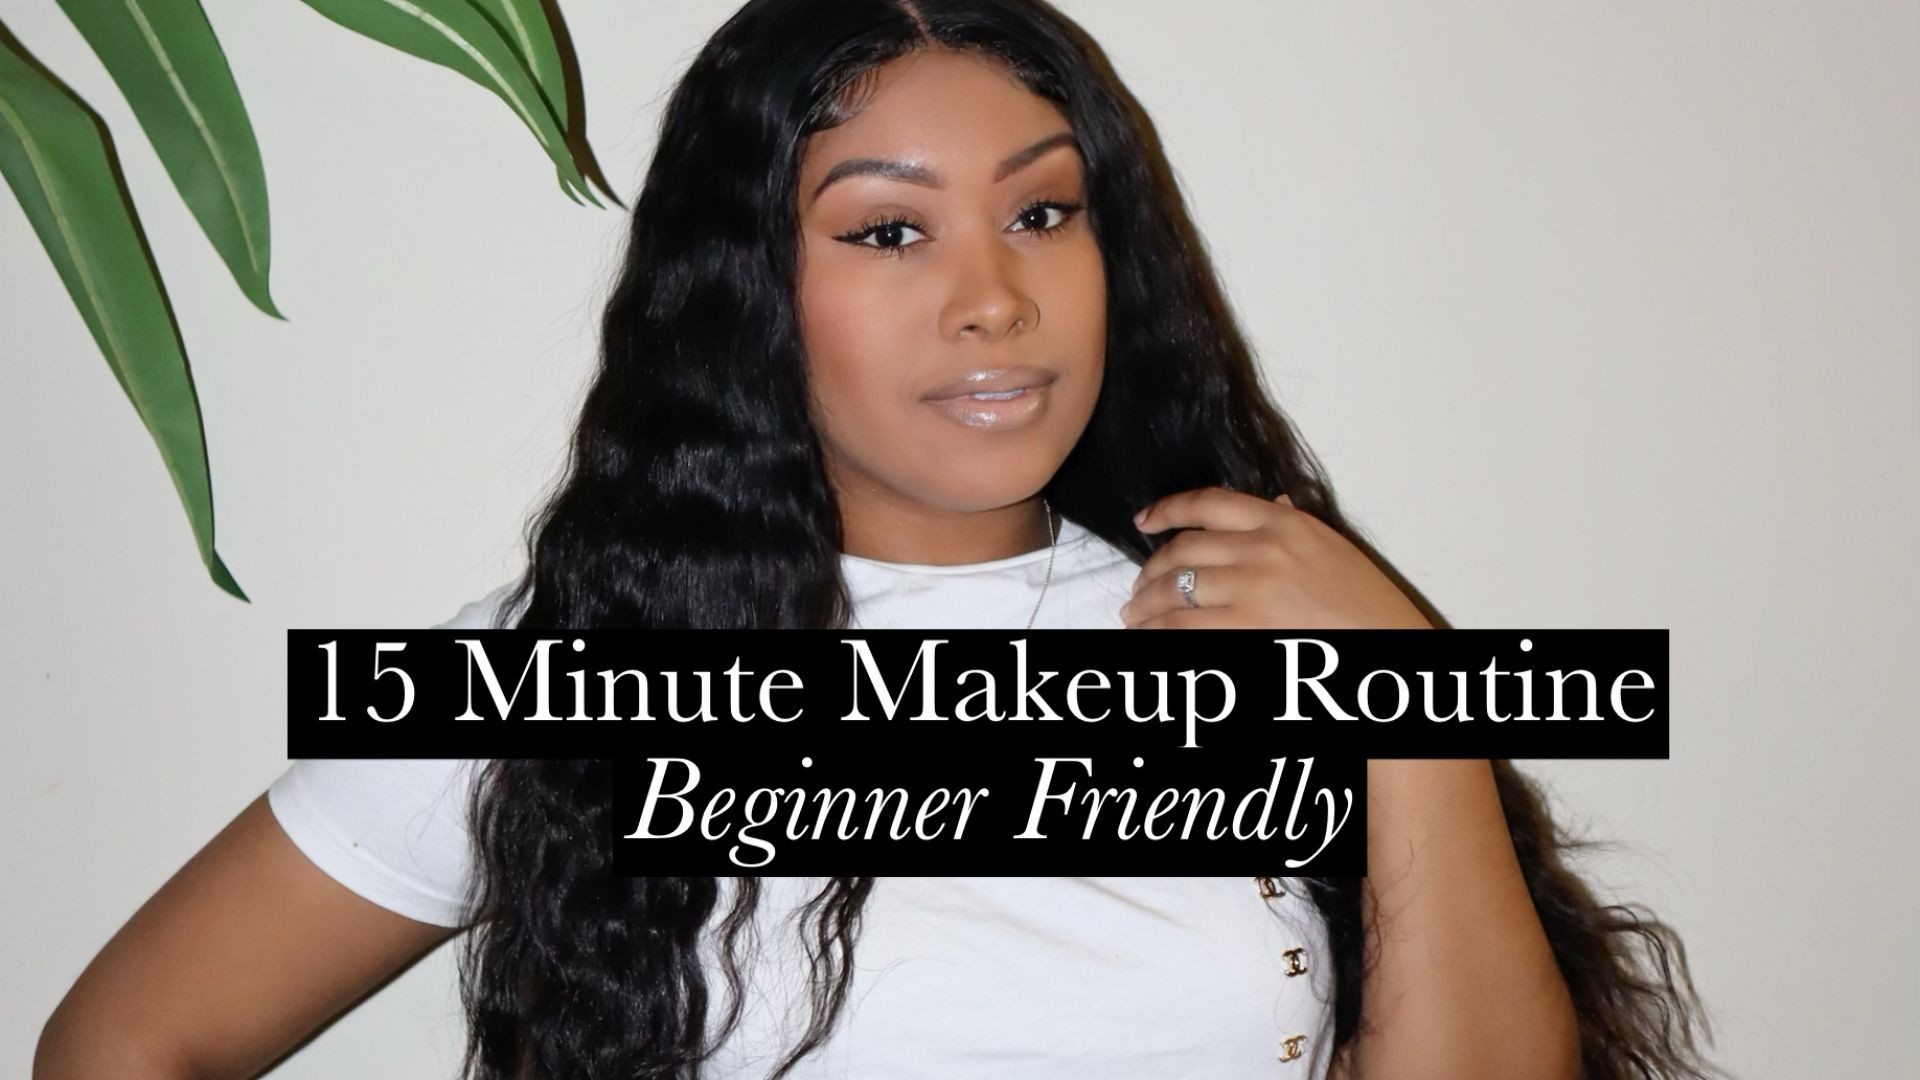 My 15 Minute Makeup Routine